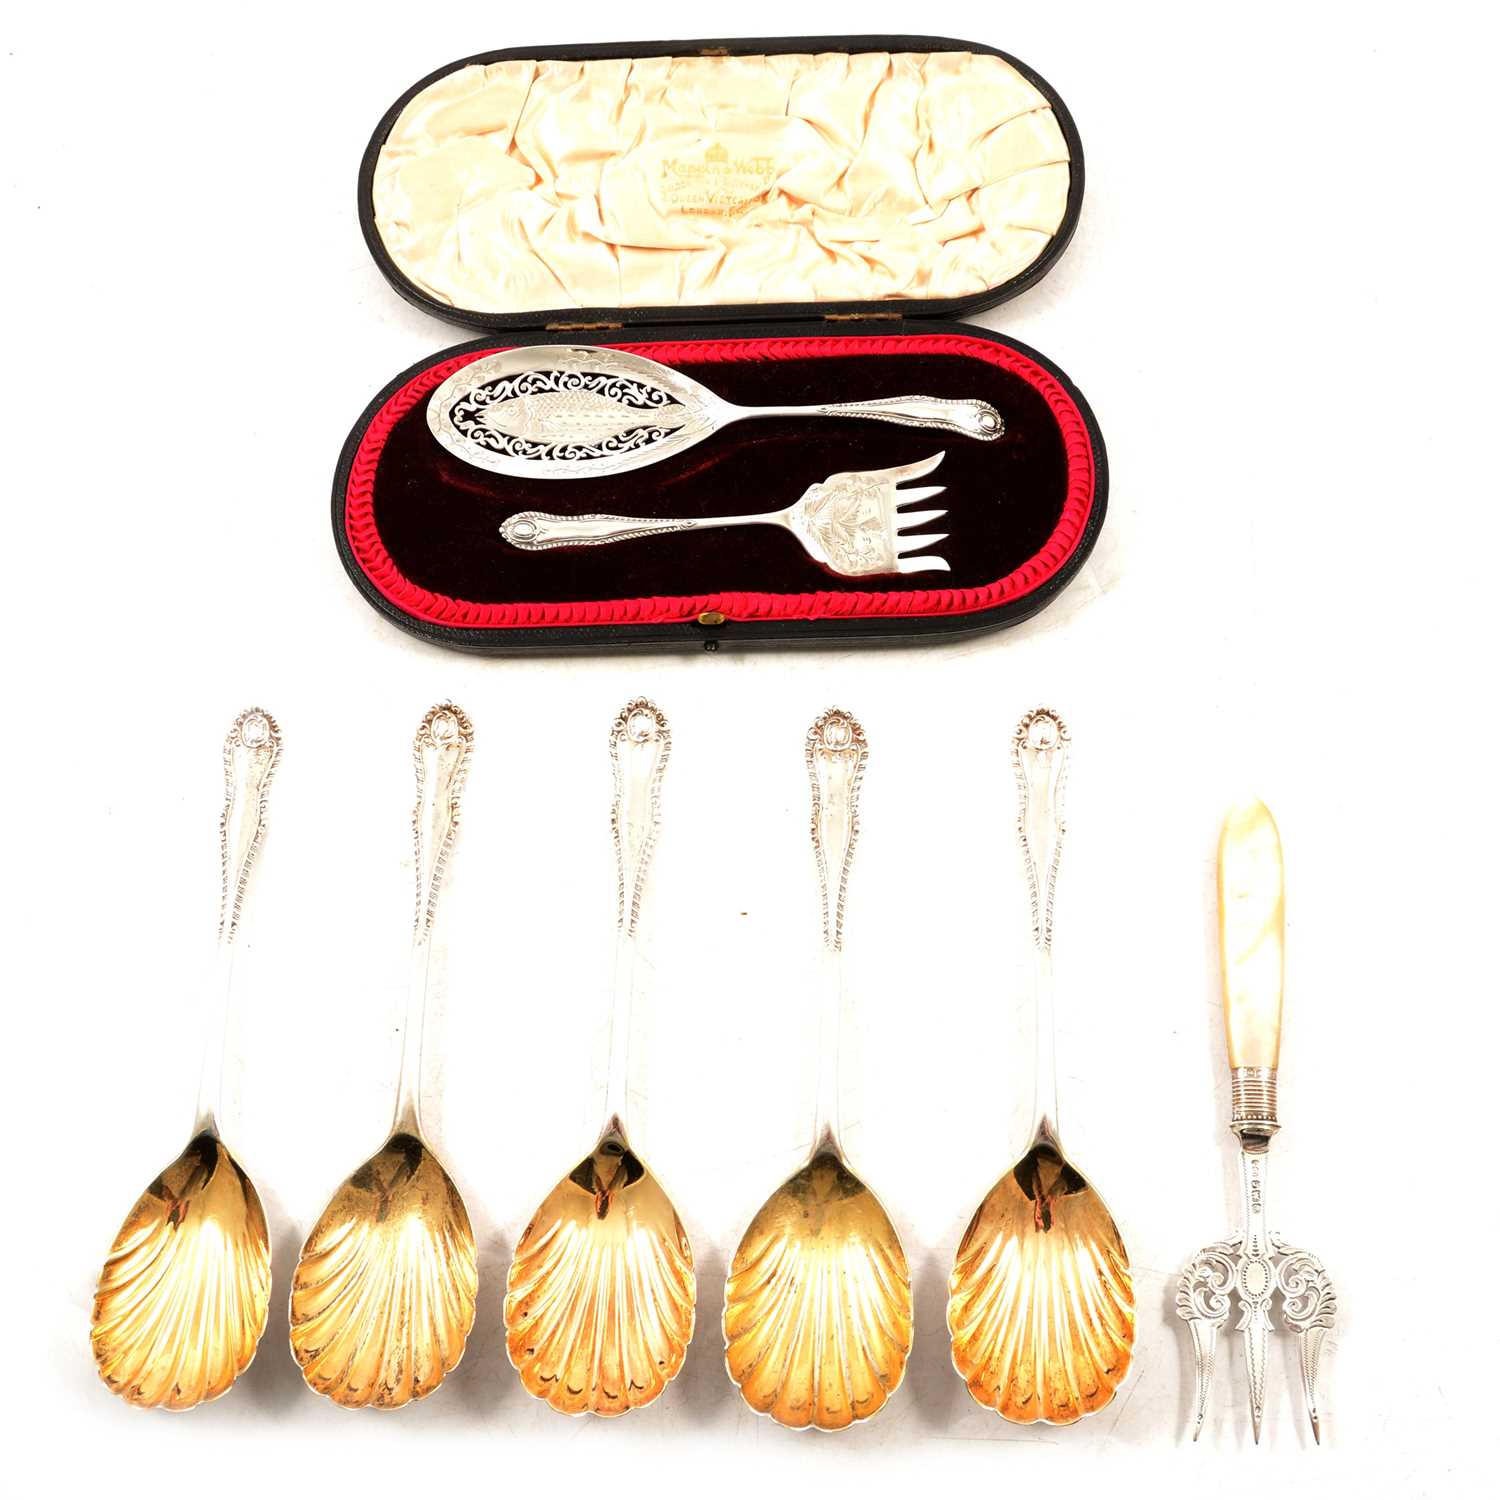 Pair of silver sardine / char servers, Mappin & Webb Ltd, Sheffield 1906, and other flatware.